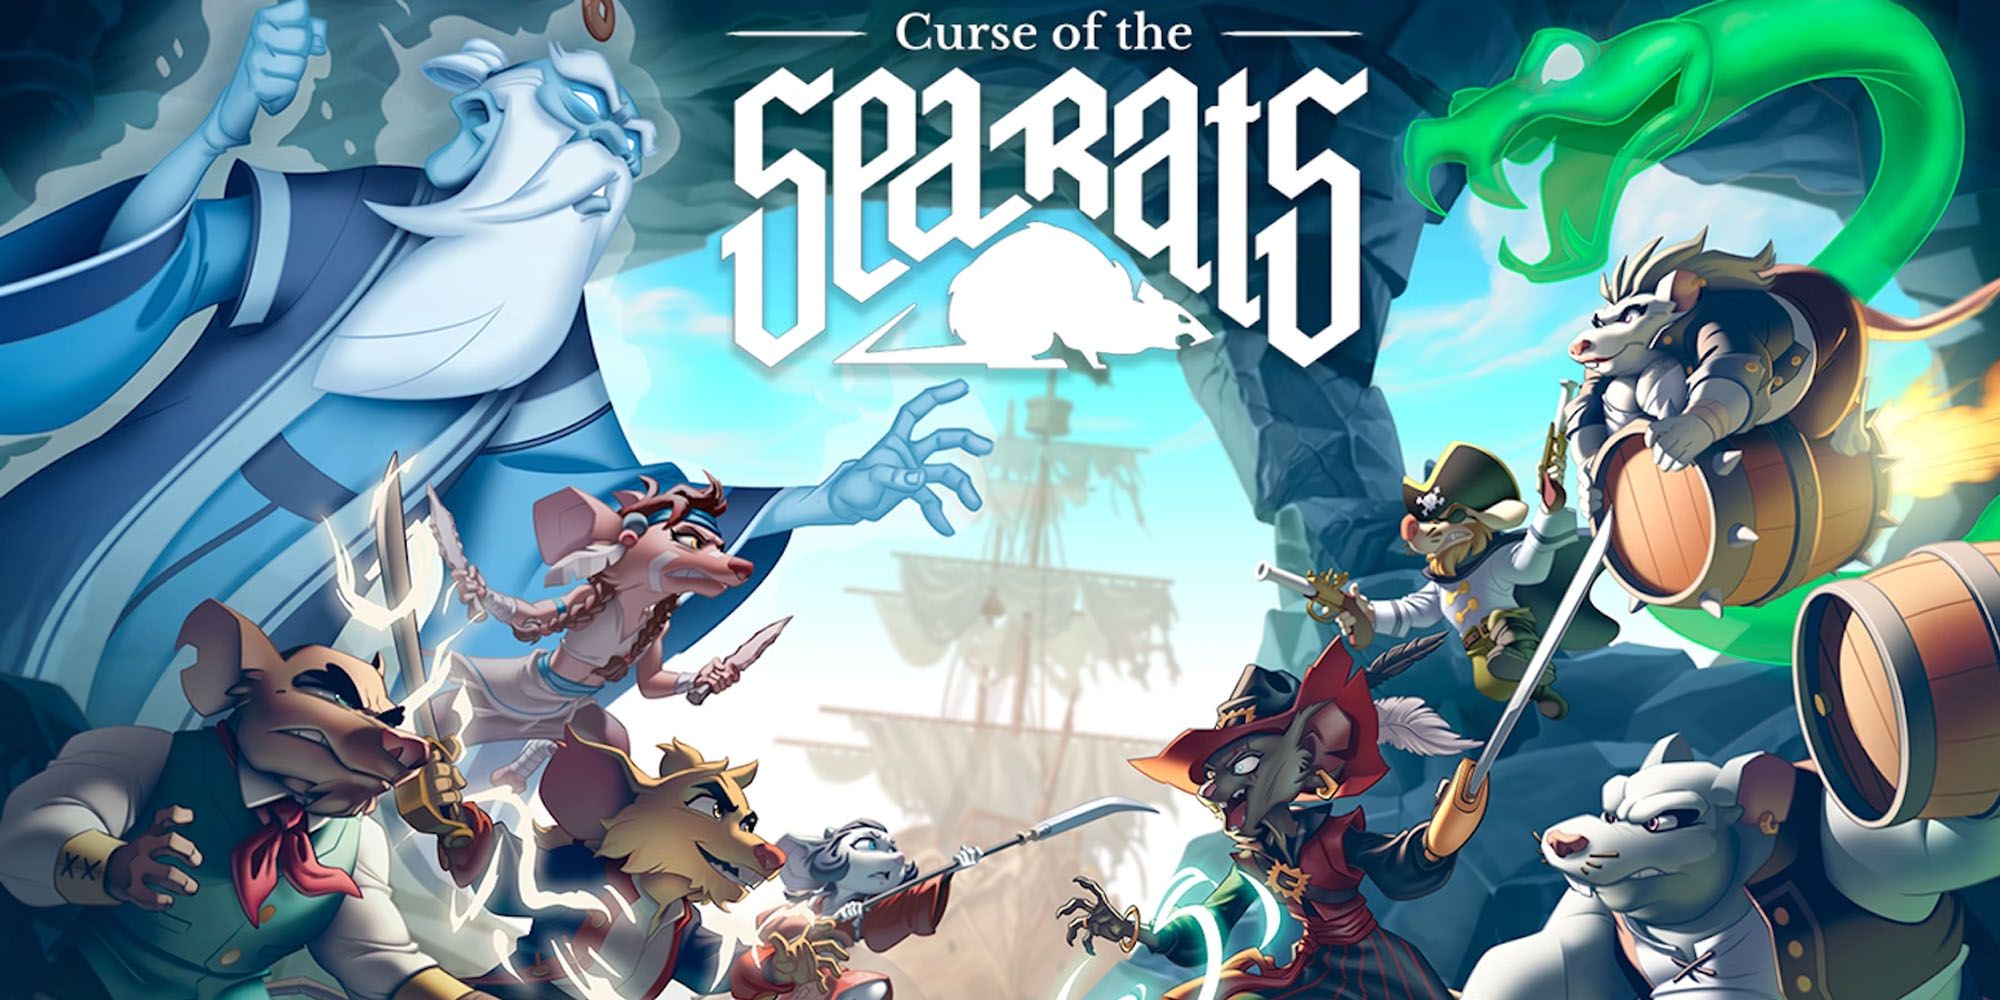 Curse of the Sea Rats image featuring swashbuckling characters from the game facing off, with a disparate crew of heroes on the left and a band of pirates on the right.